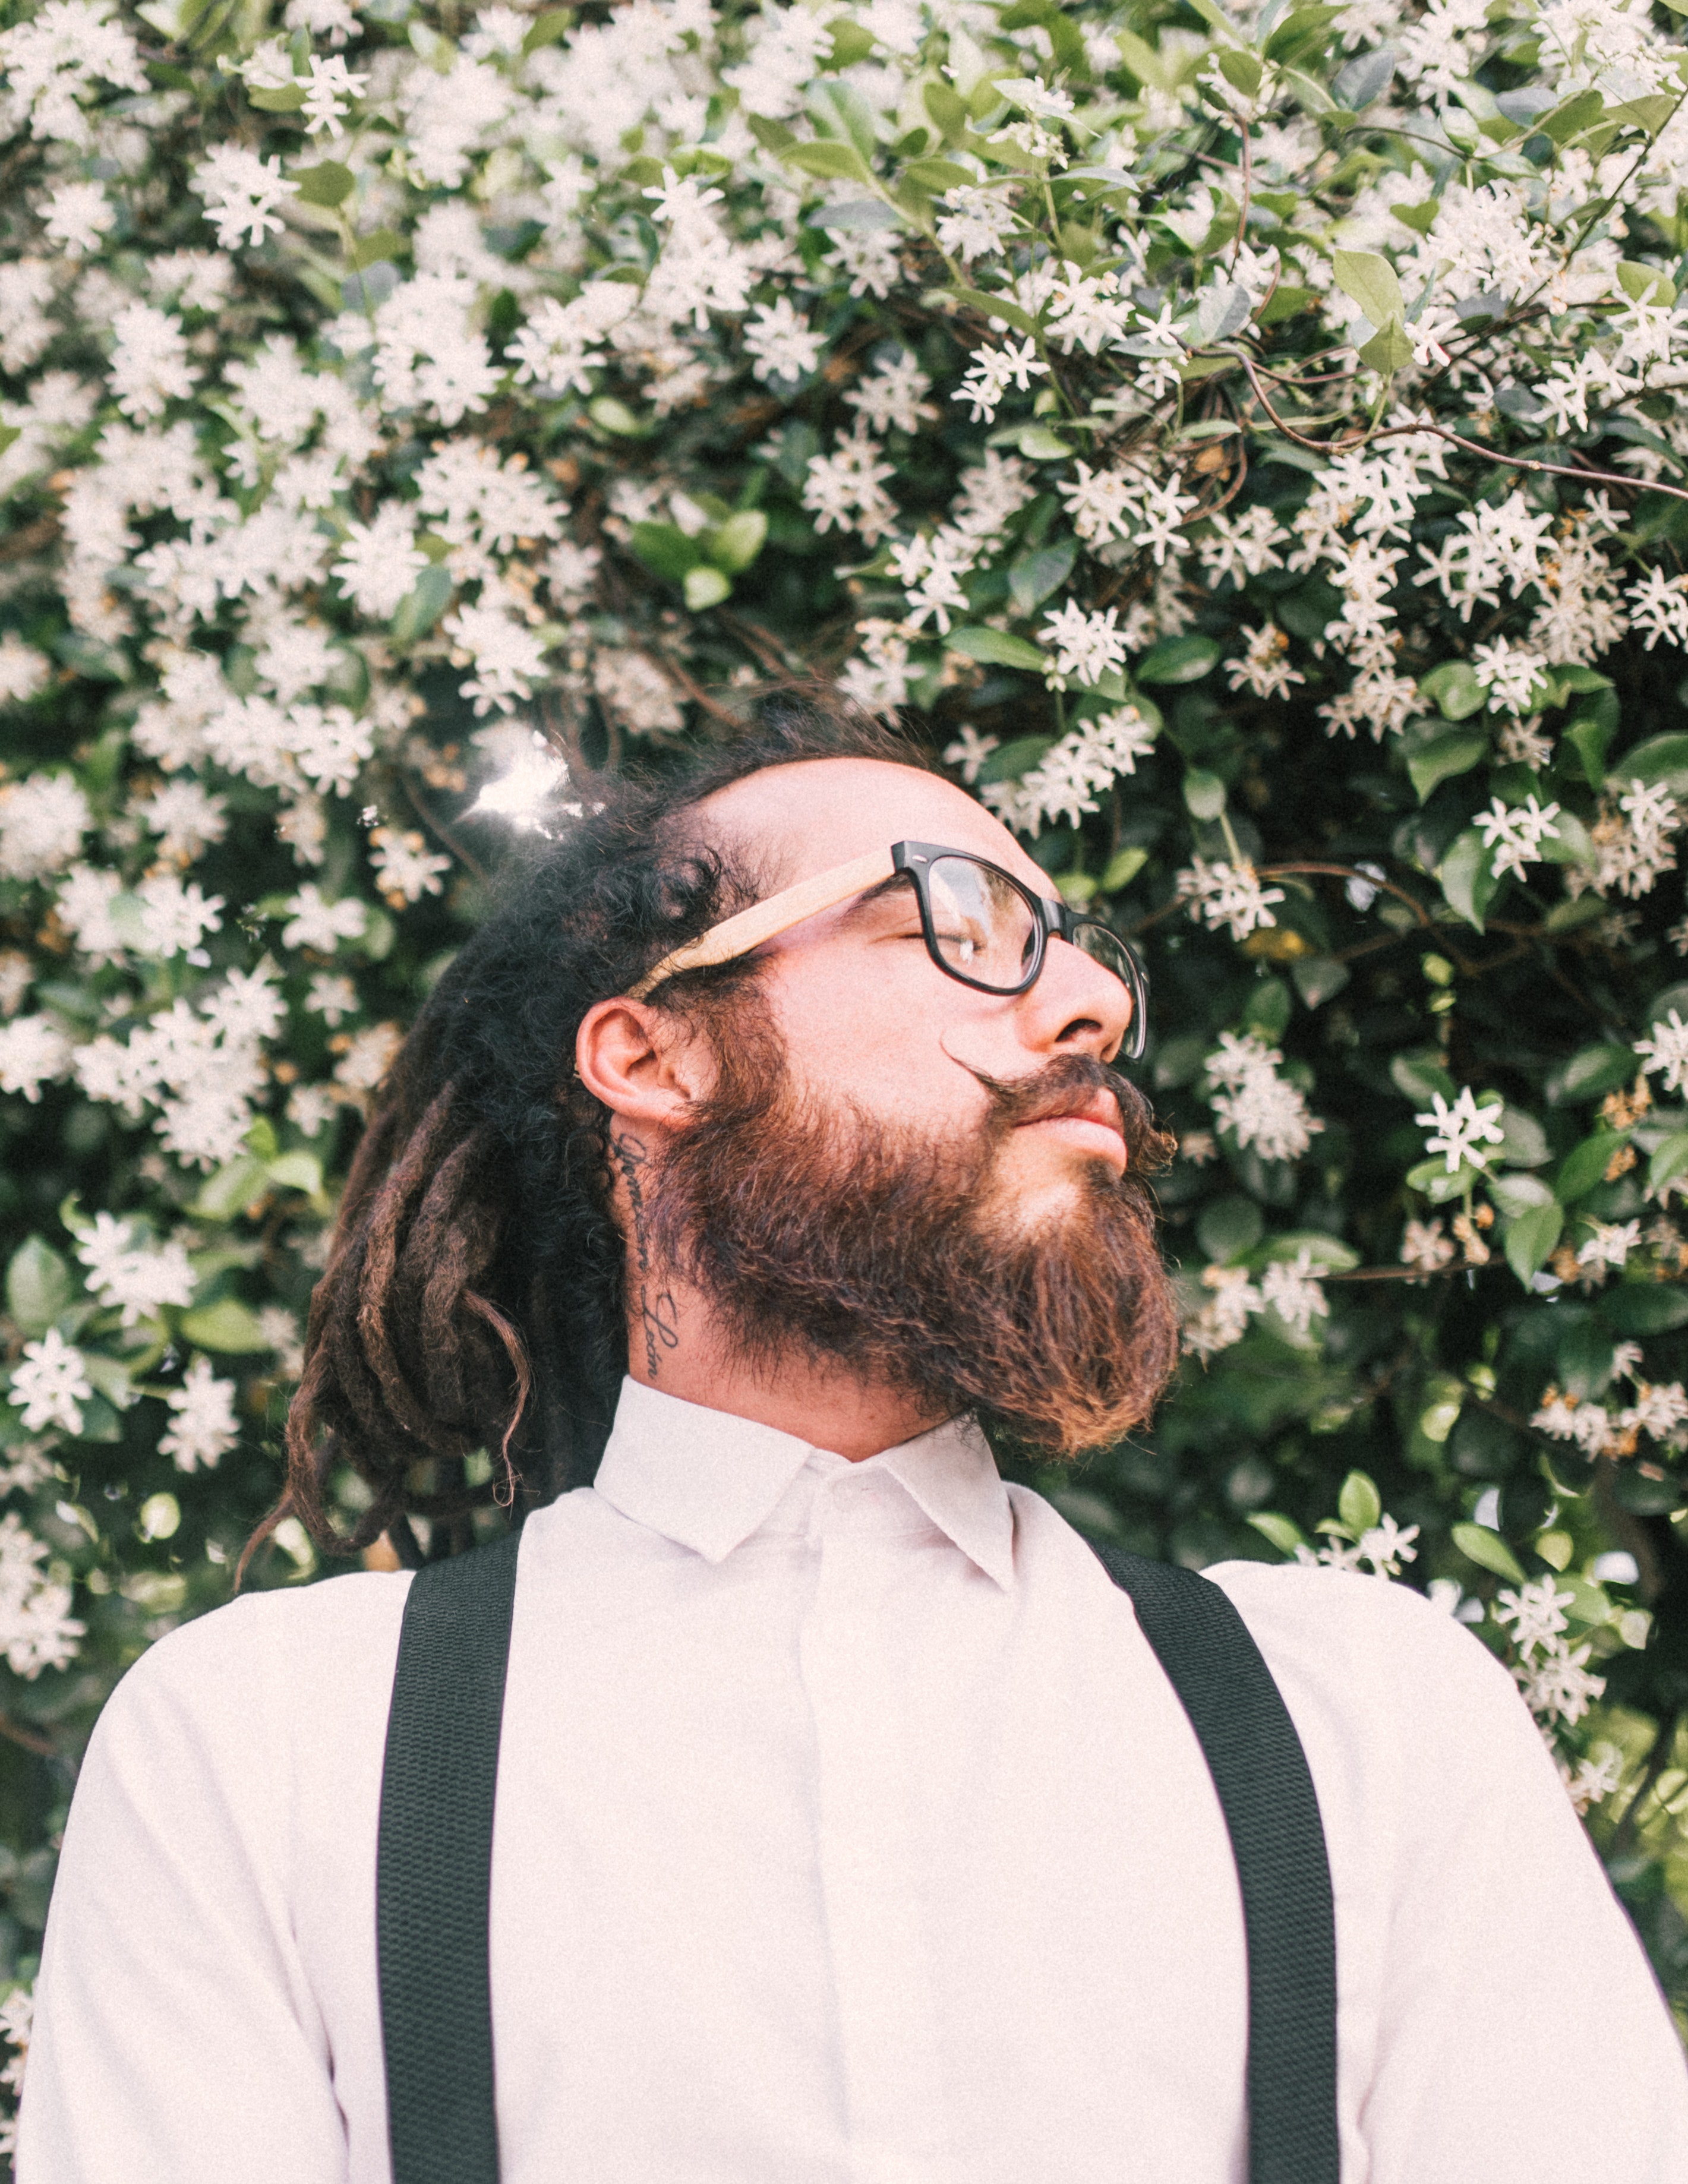 A man with dreadlocks and a beard wearing a white shirt and eyeglasses